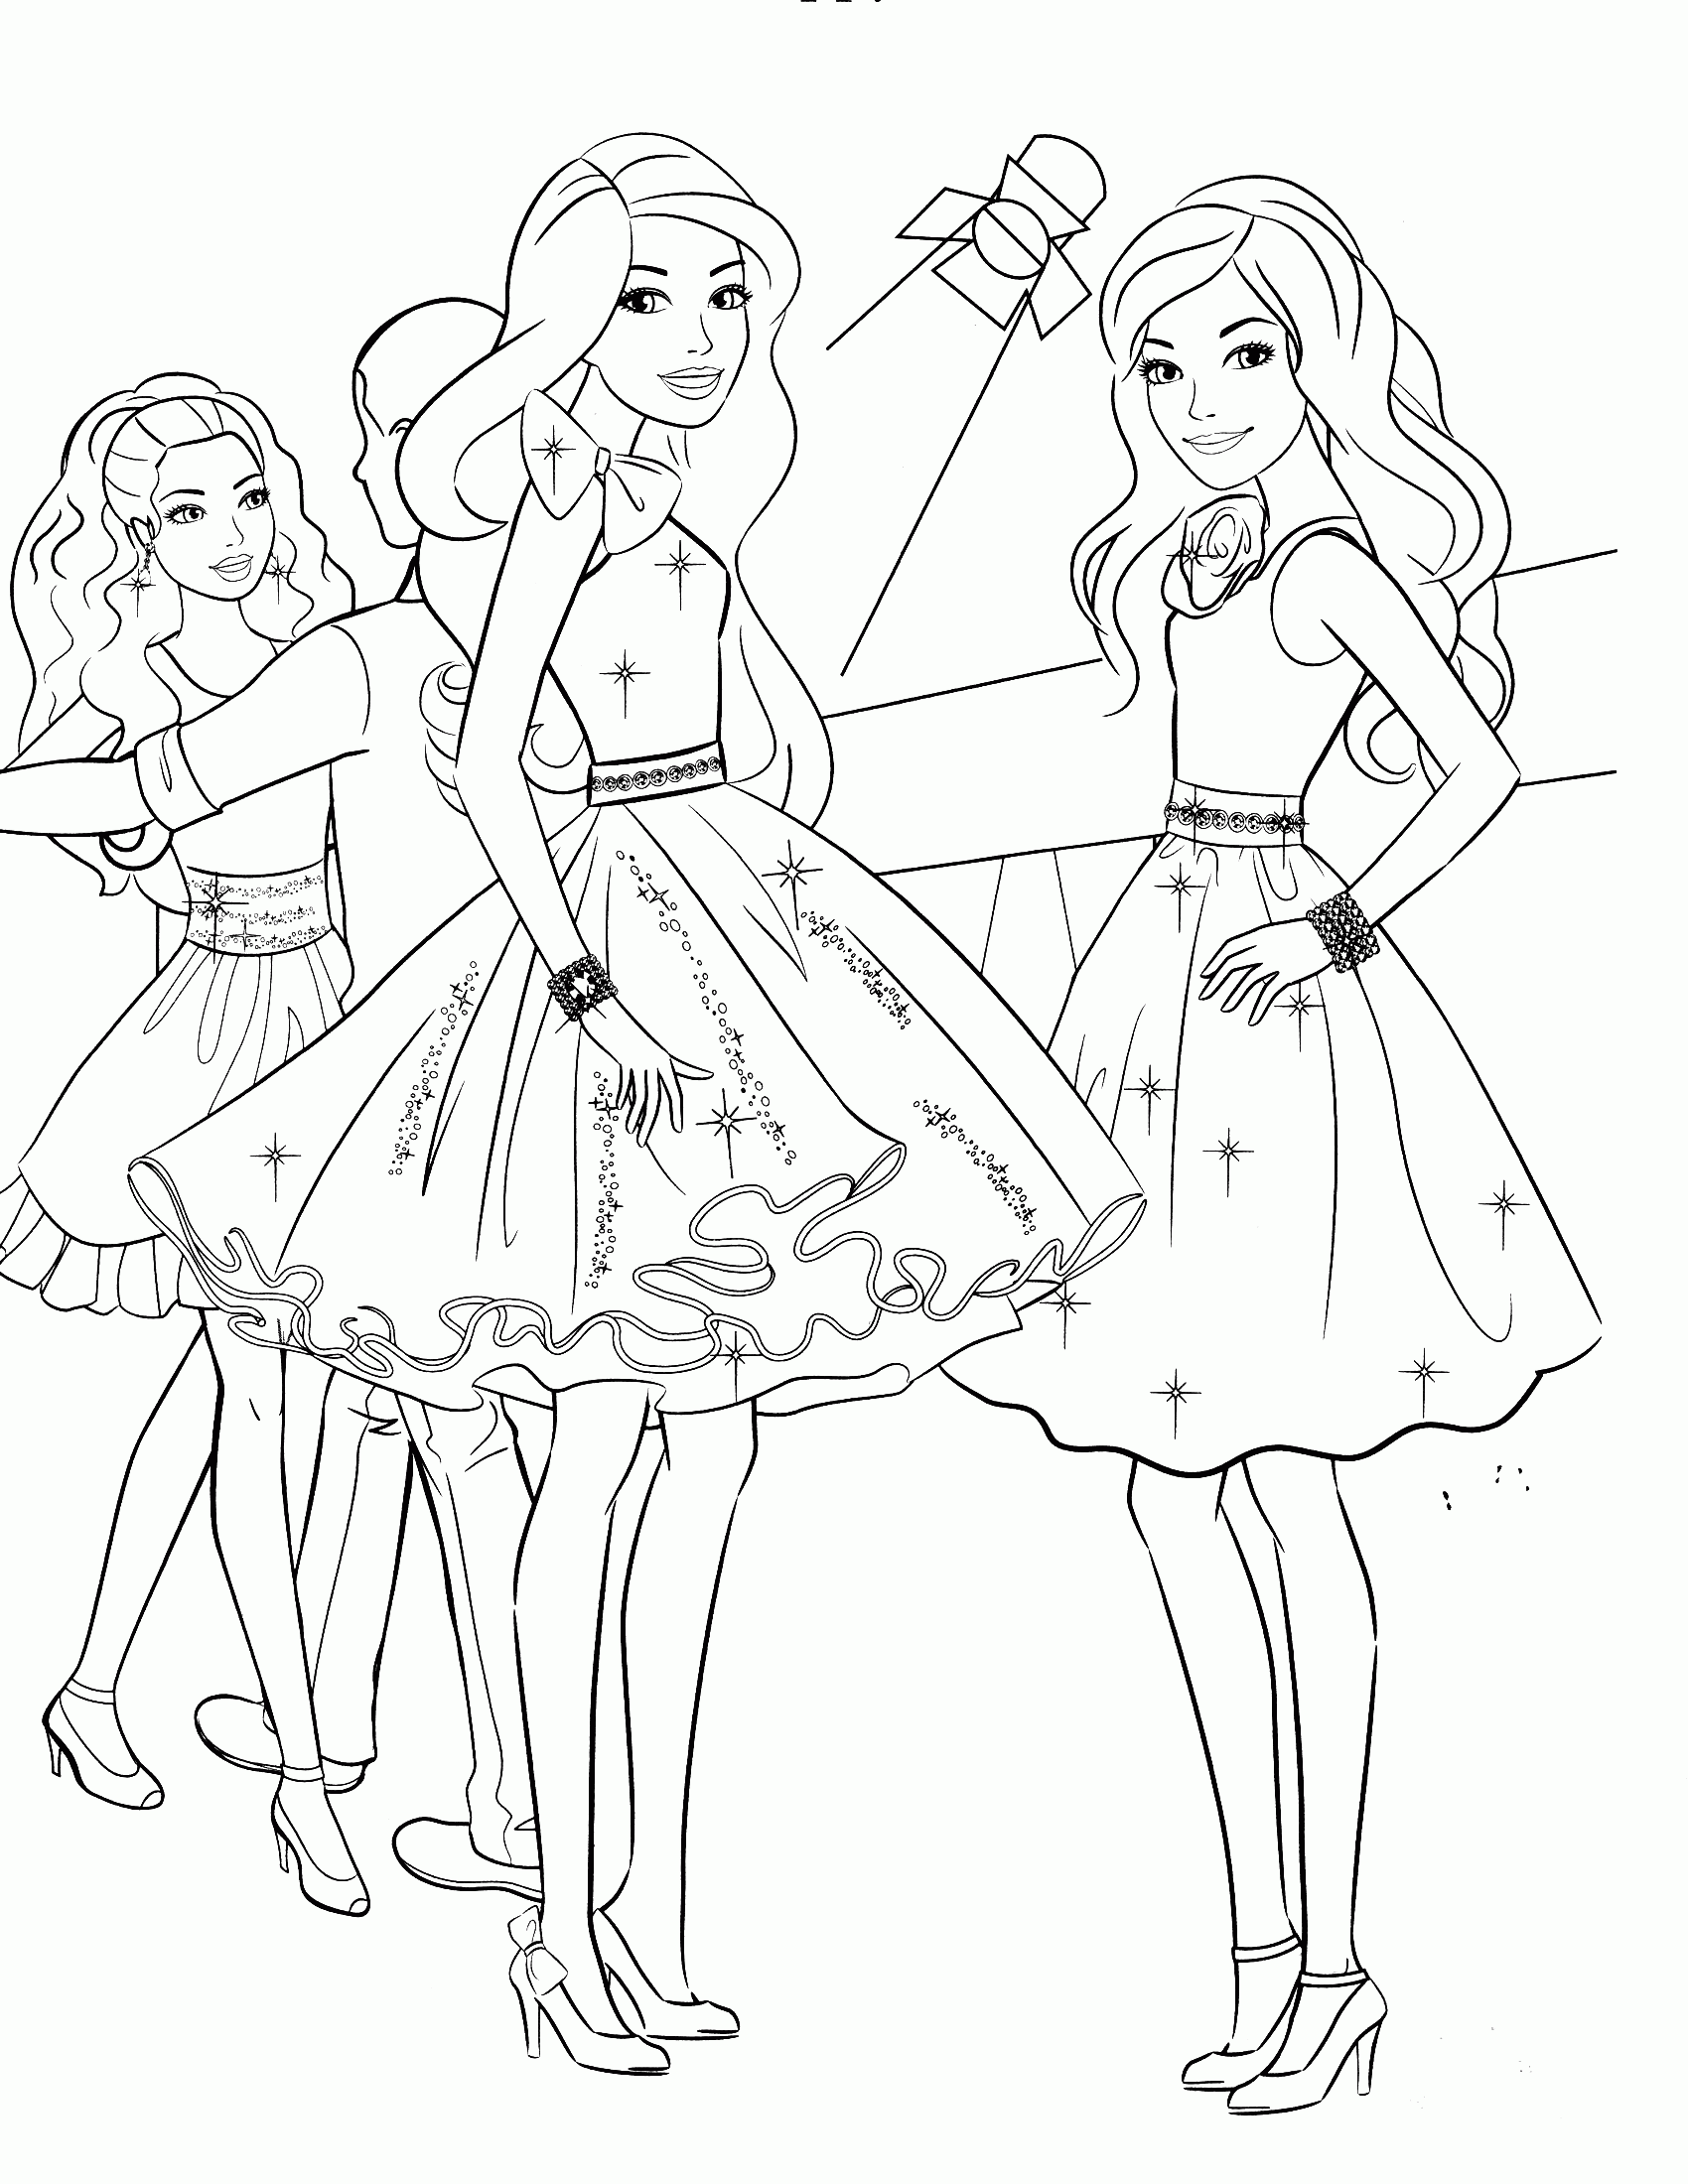 Free Coloring Pages Of Barbie, Download Free Coloring Pages Of ...